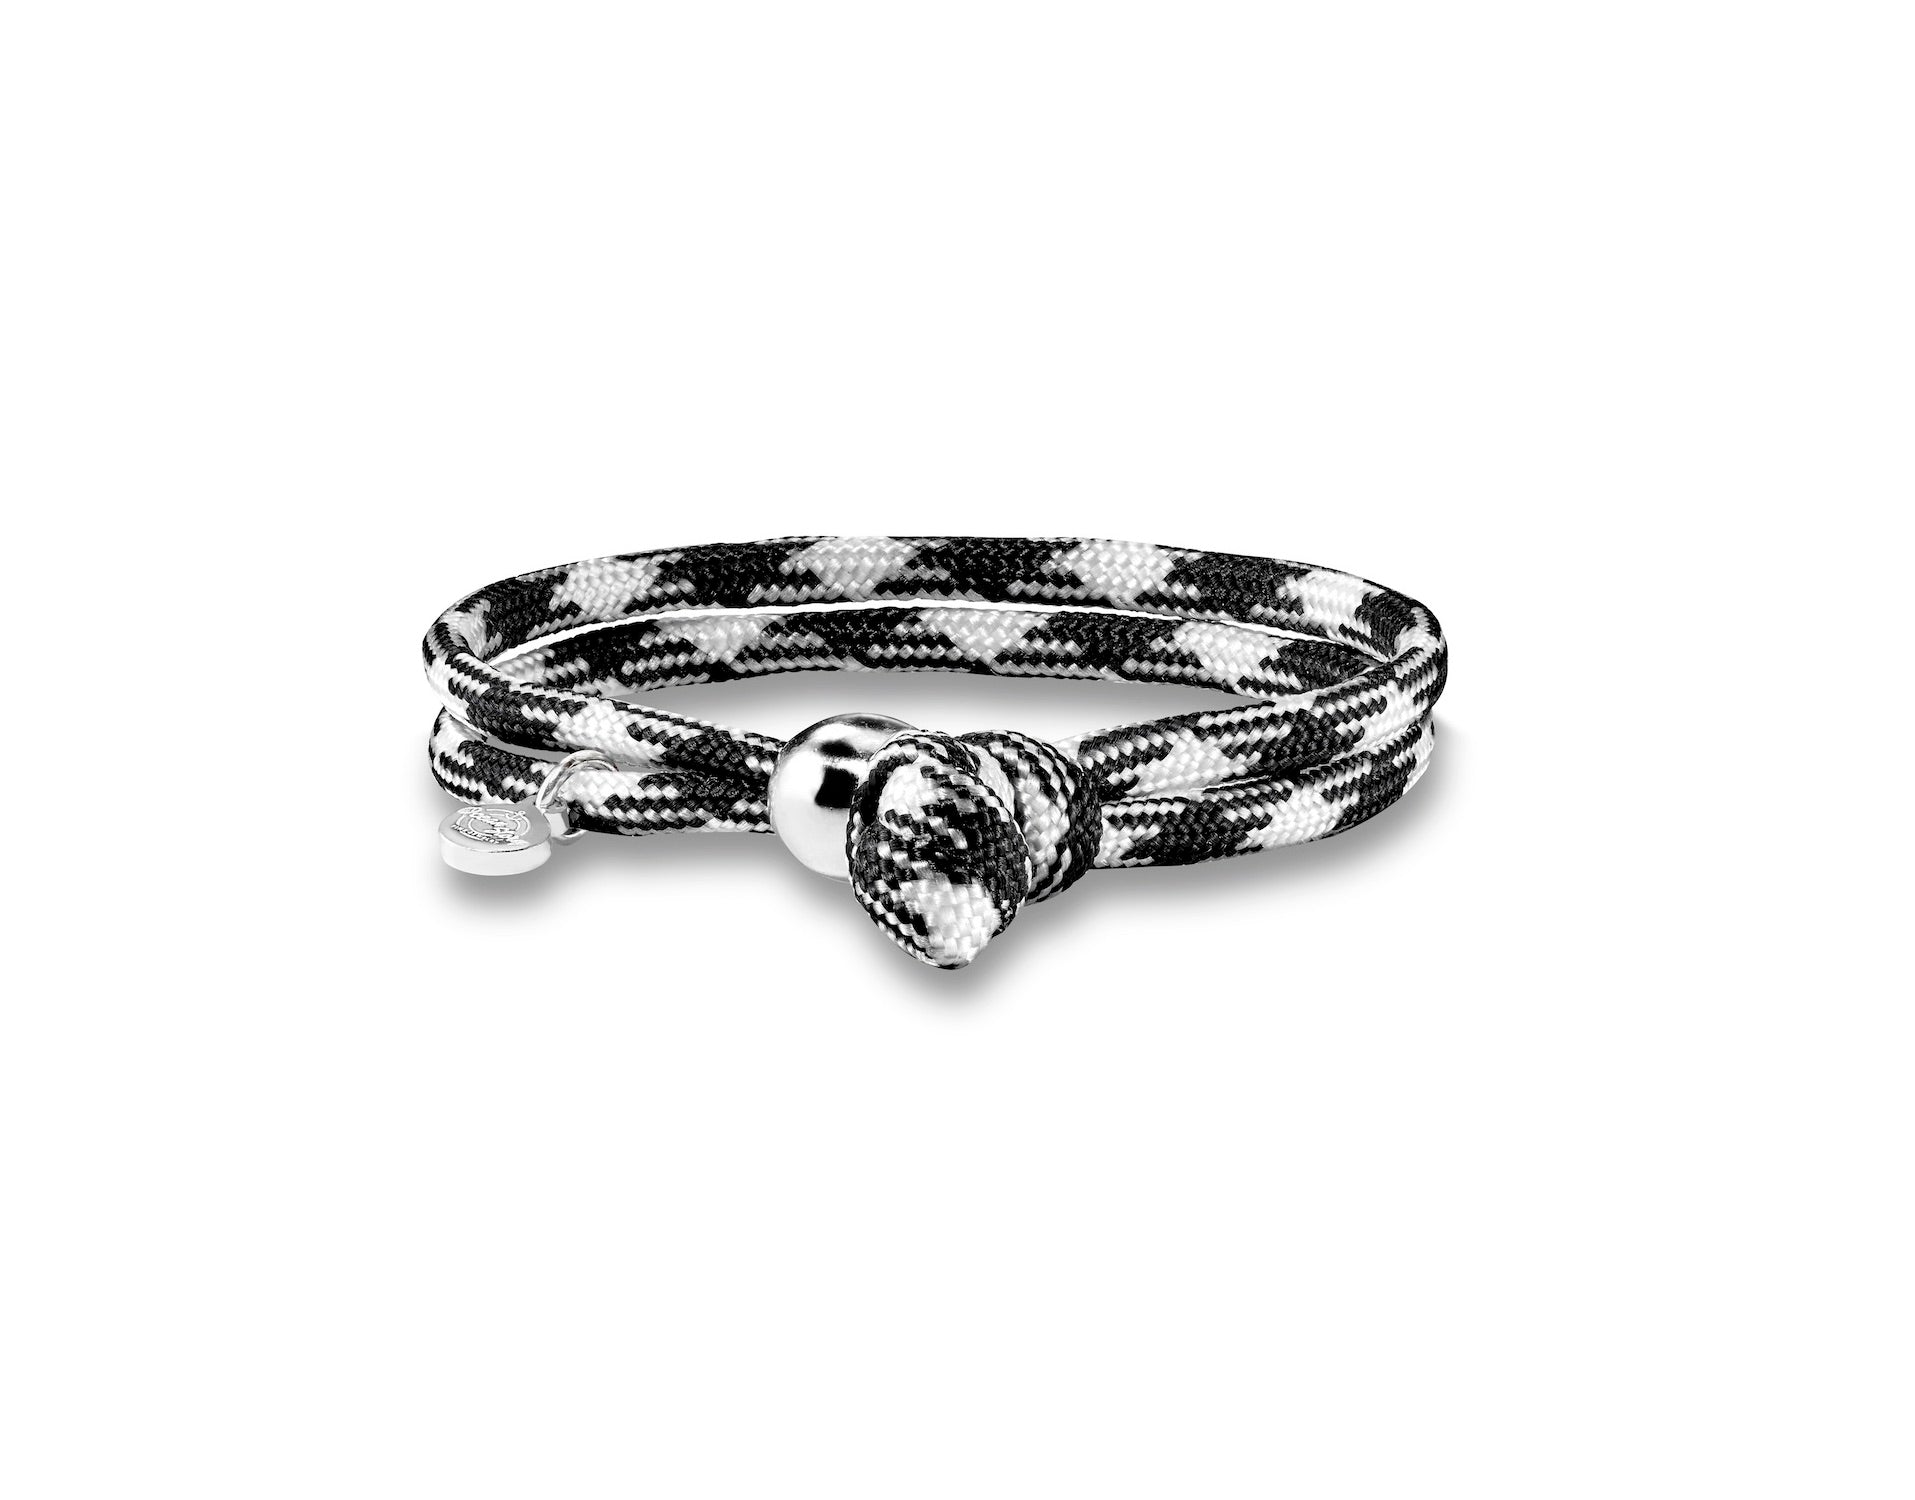 Small Knot Bracelet with 18 carat white gold